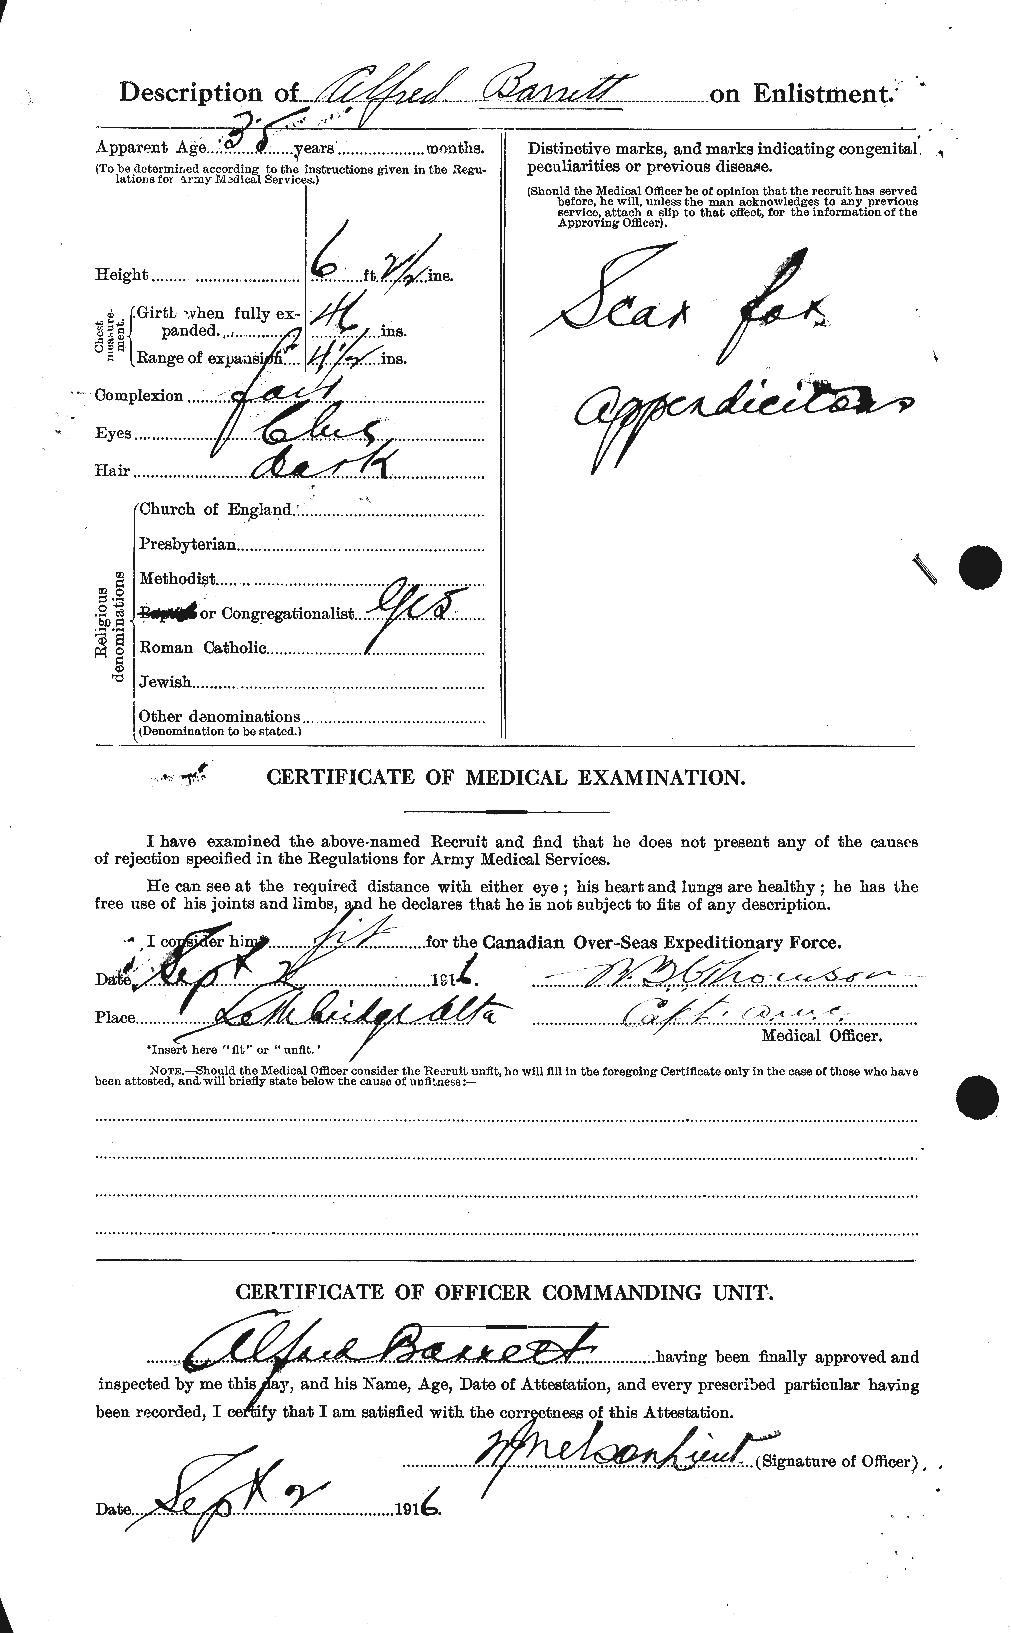 Personnel Records of the First World War - CEF 222260b